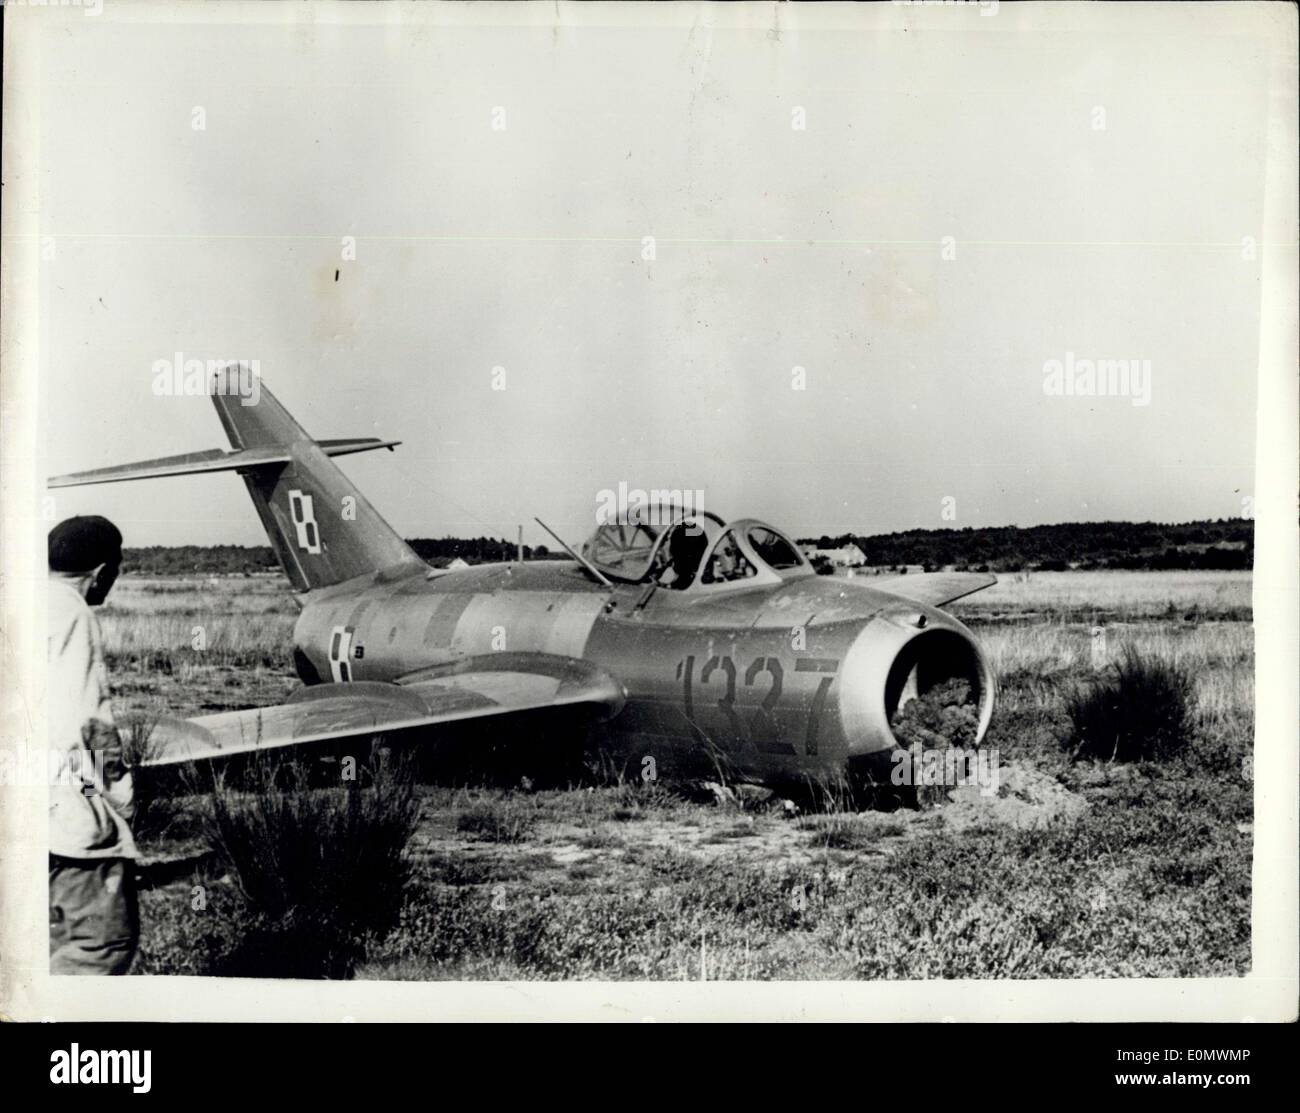 Sep. 27, 1956 - A Polish Air Force Lieutenant landed one of the latest type MIG jet fighters on the tiny airfield at Roenne on the Baltic Island of Bornholm and asked for political asylum. The MIG is of a design previously unknown to Western experts. It is believed to be an improved version of the MIG 15. The wing of the plane was damaged when the pilot landed the aircraft on an unfinished part of the airfield. Photo Shows: View of the MIG aircraft, after landing on the Danish Island of Bornholm. Stock Photo